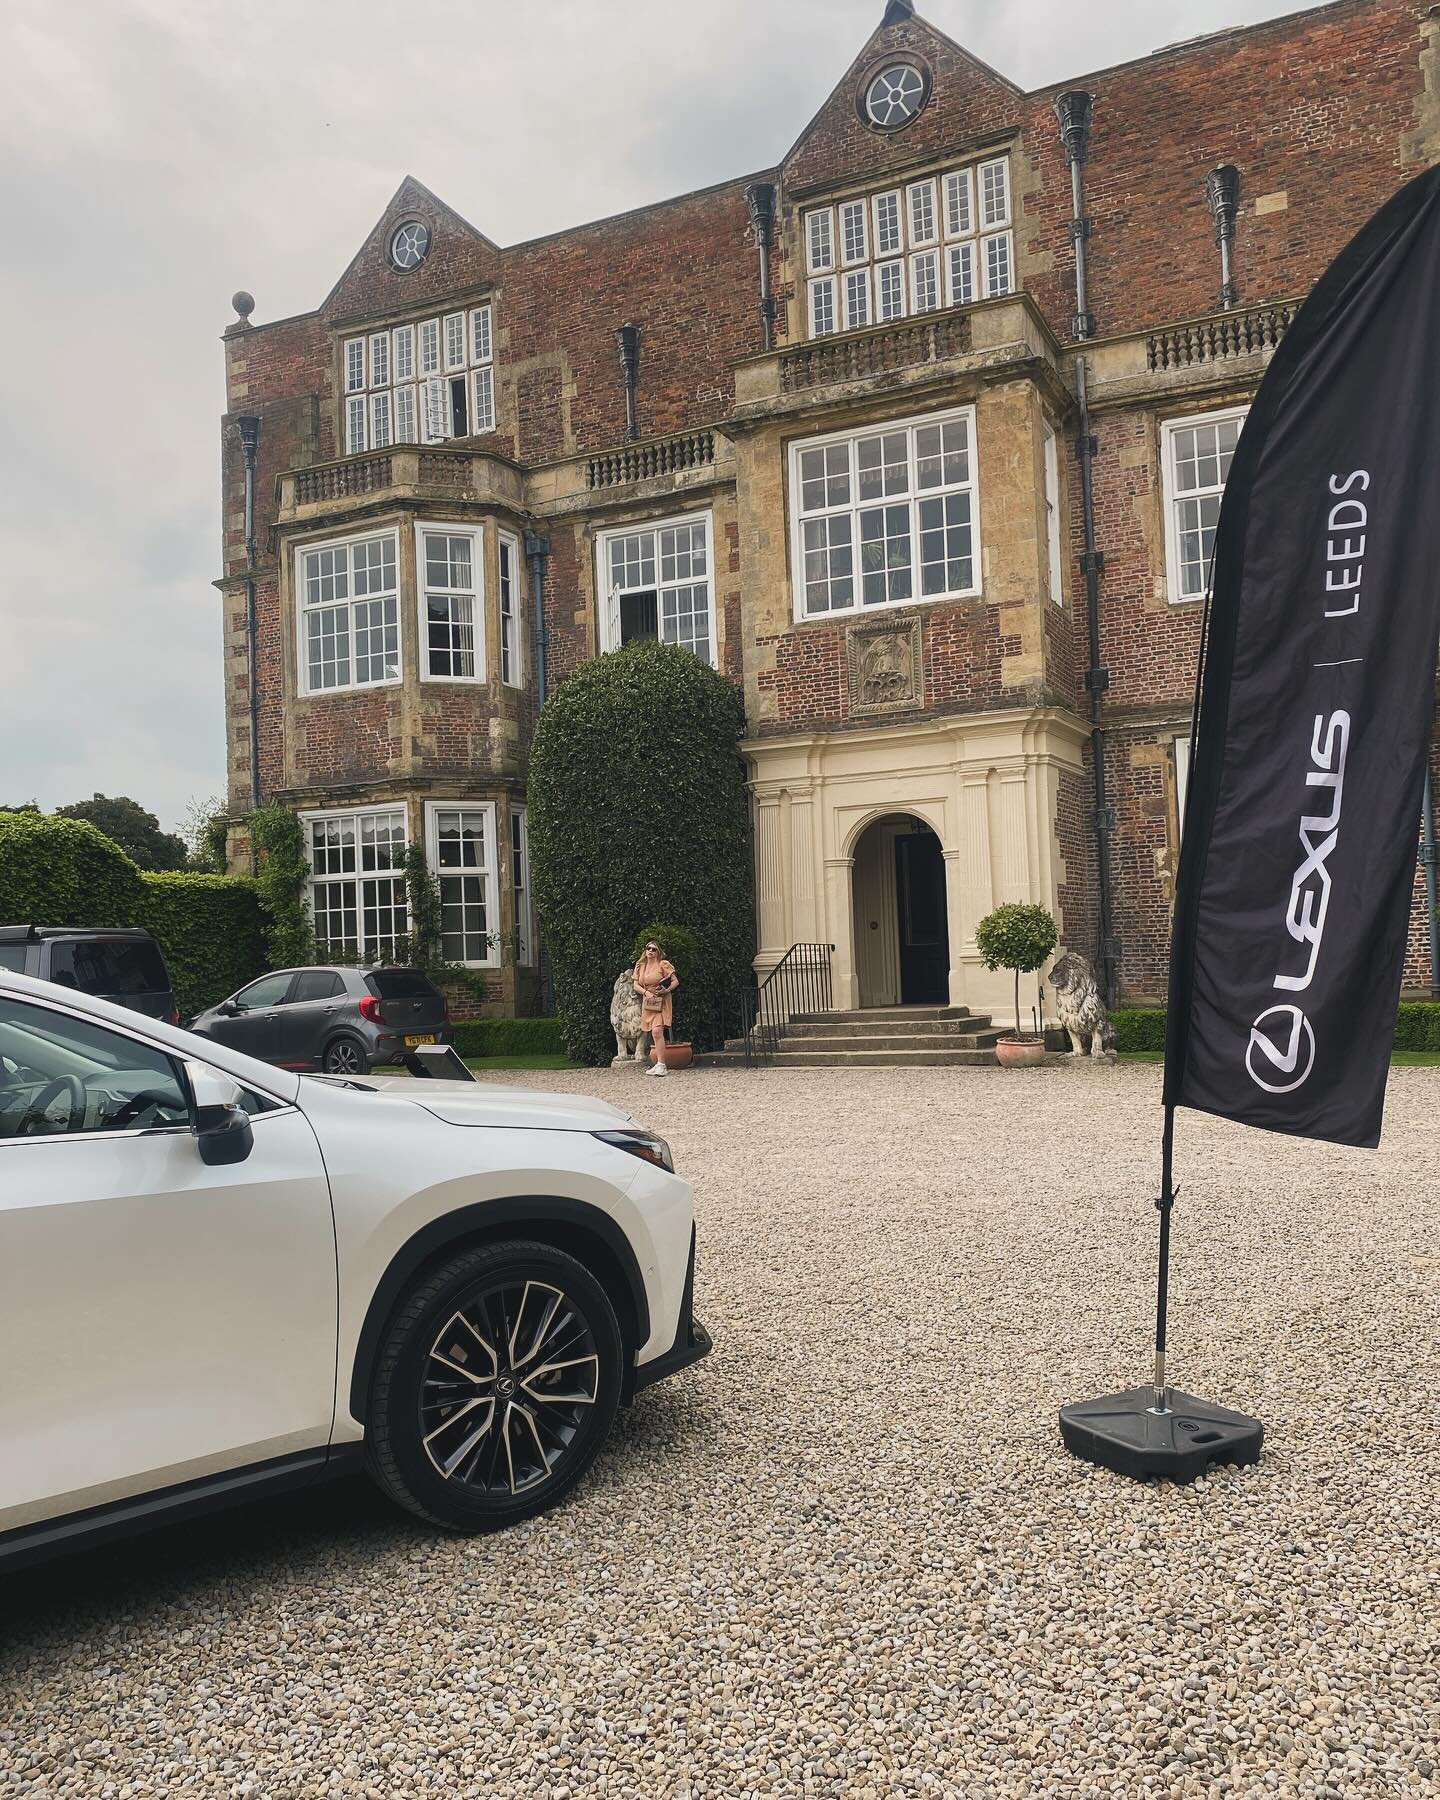 We all had the Friday feeling today! 😎

Congratulations to @yorkshire_businesswoman and @lexus.leeds for a fantastic event at Goldsborough Hall this afternoon with the most perfect weather.

Thank you to all our wonderful guests who made it such a s